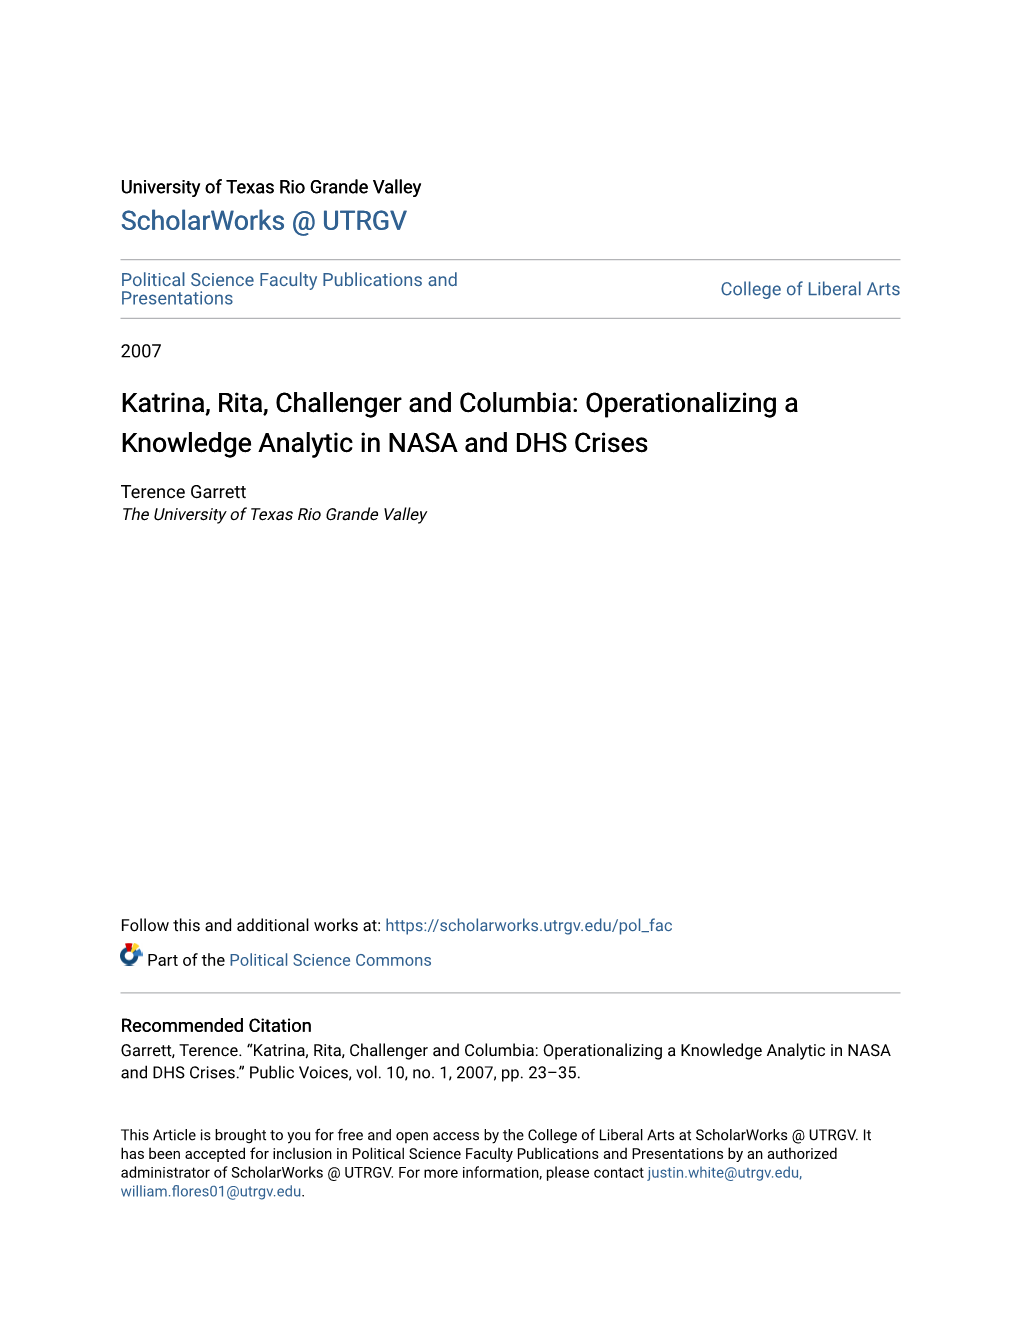 Katrina, Rita, Challenger and Columbia: Operationalizing a Knowledge Analytic in NASA and DHS Crises